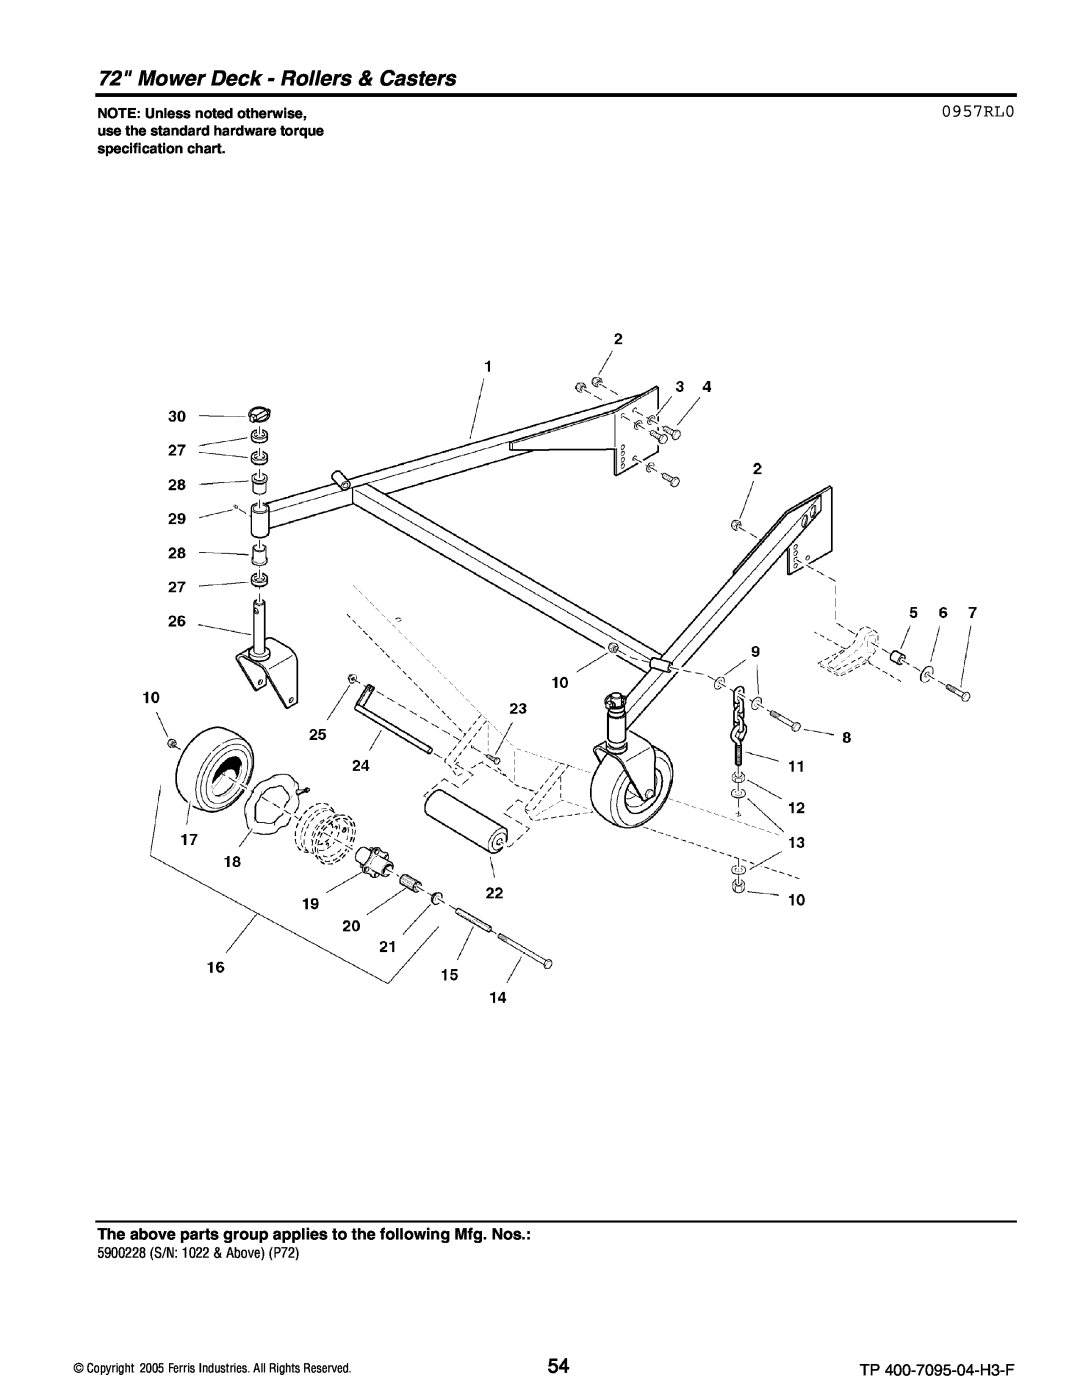 Ferris Industries 5900228, 5901036, 5901035, 5900227 Mower Deck - Rollers & Casters, 0957RL0, NOTE Unless noted otherwise 